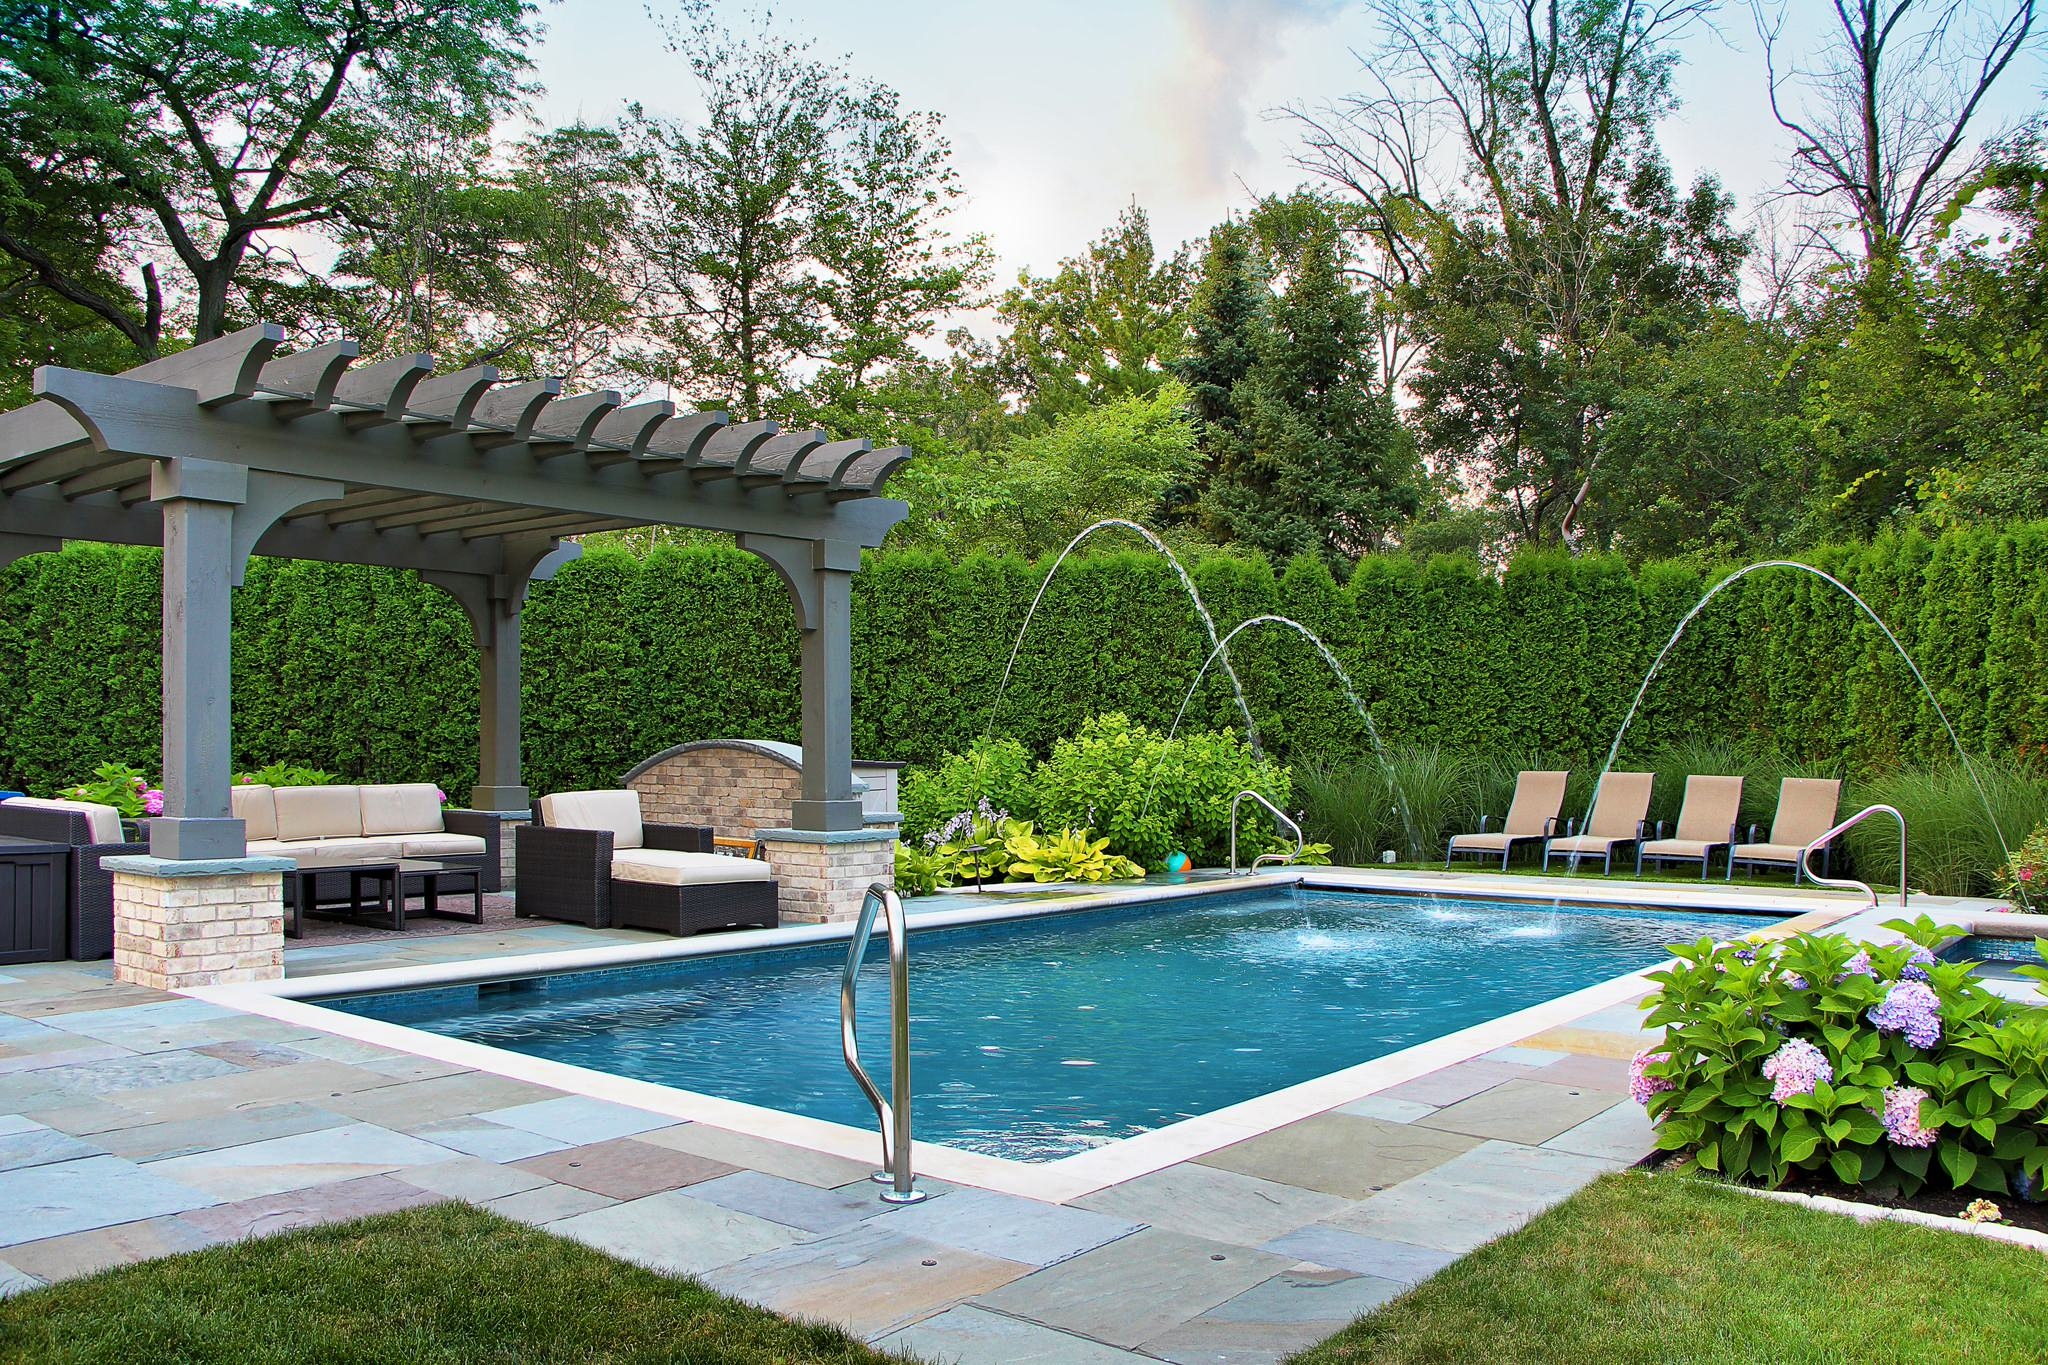 Pool with water features and a pergola